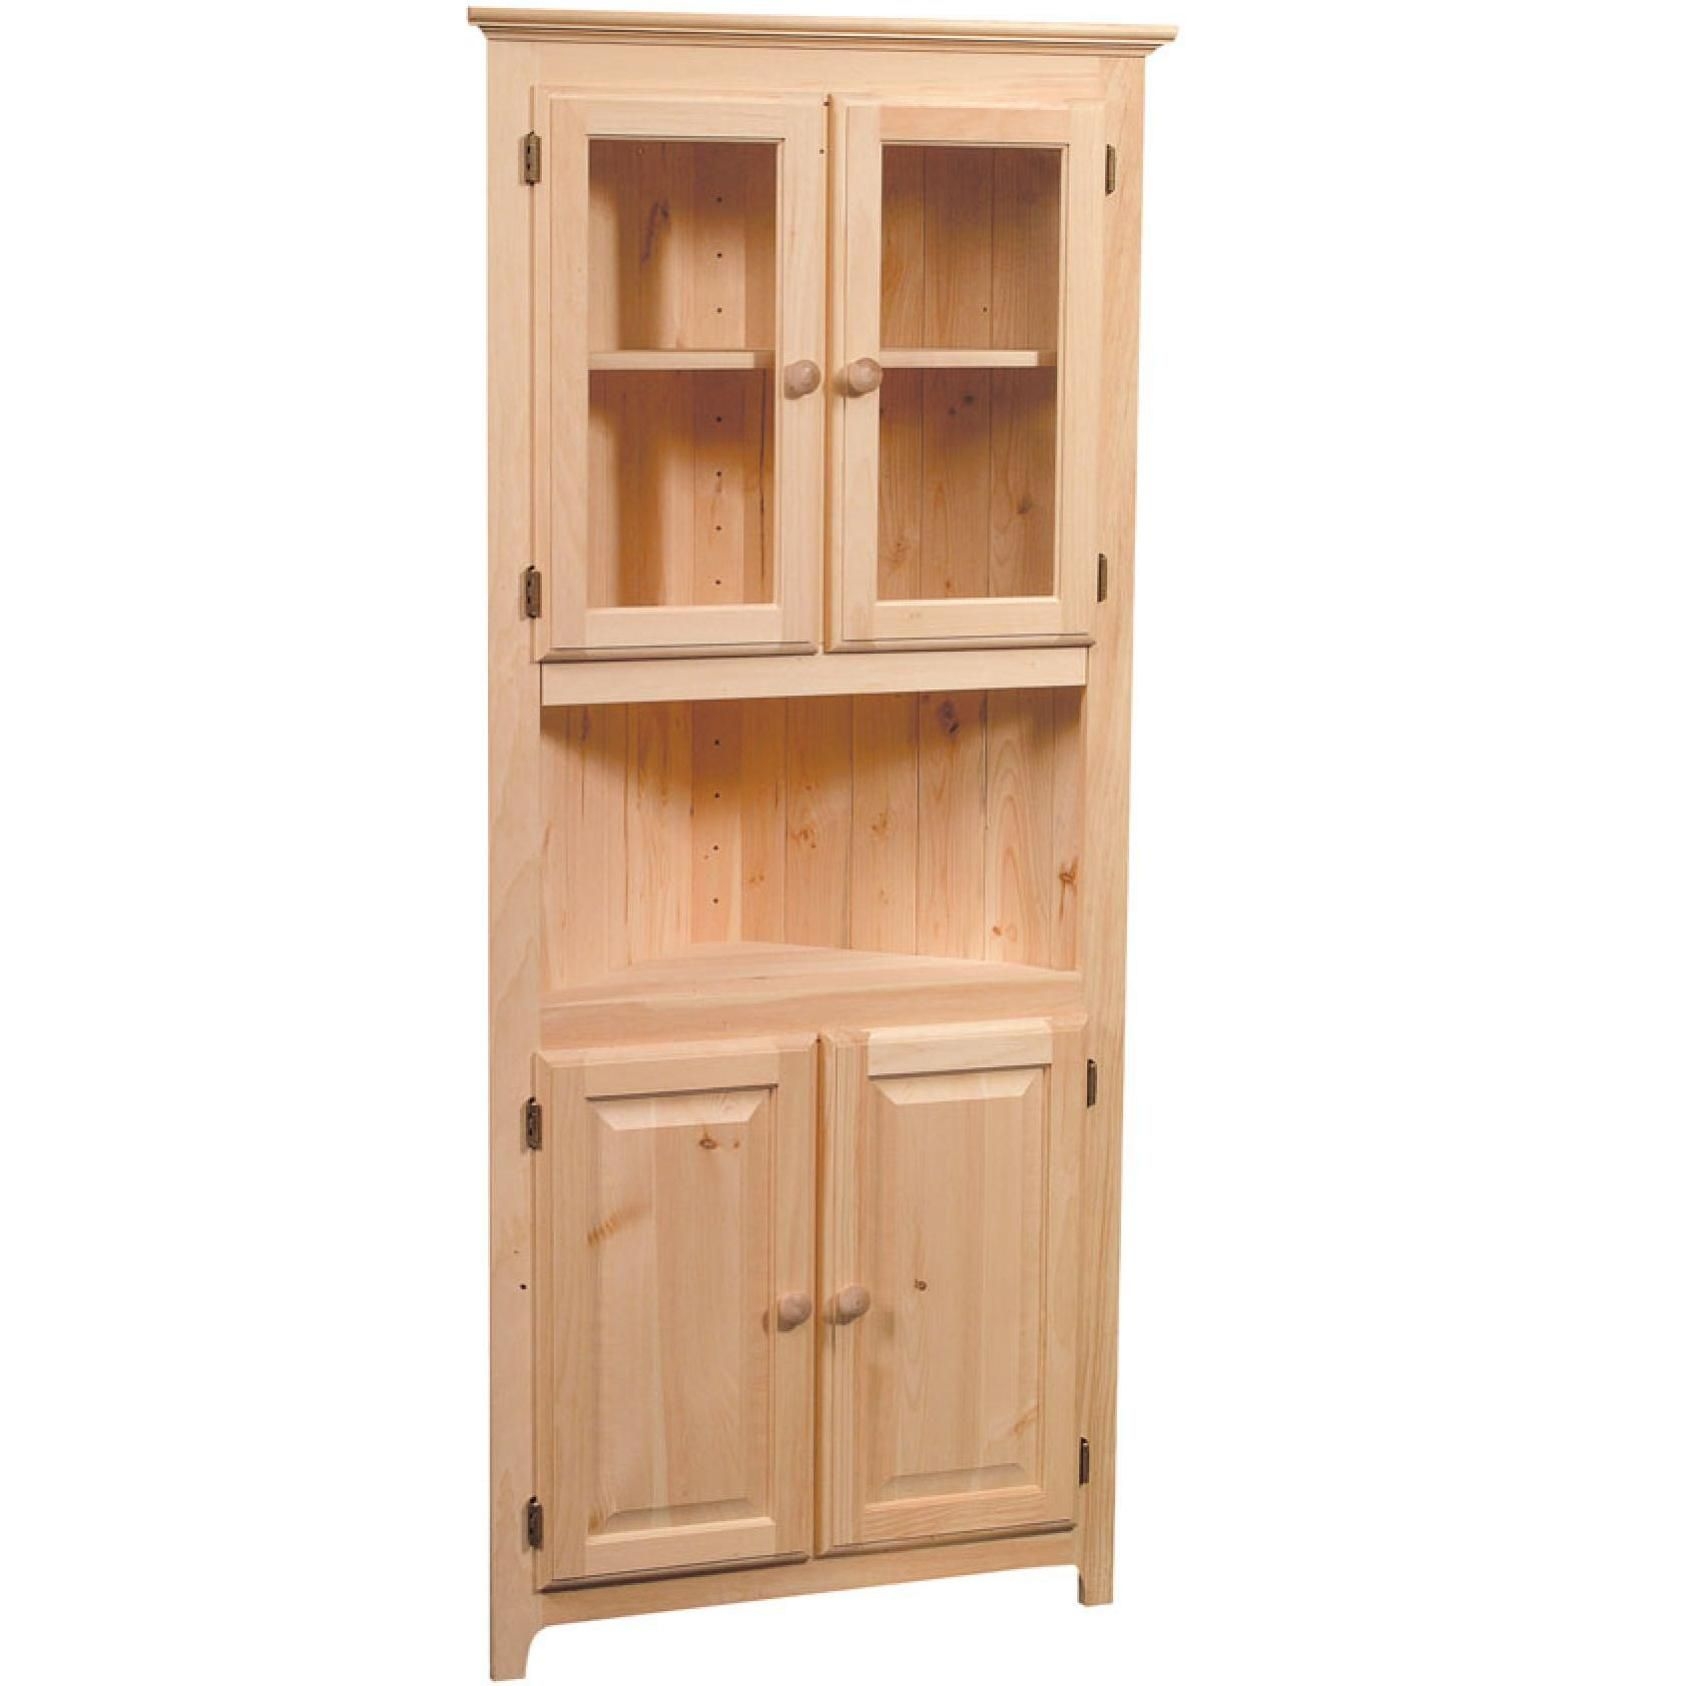 Astonishing unfinished corner cabinets with partial inset cabinet door